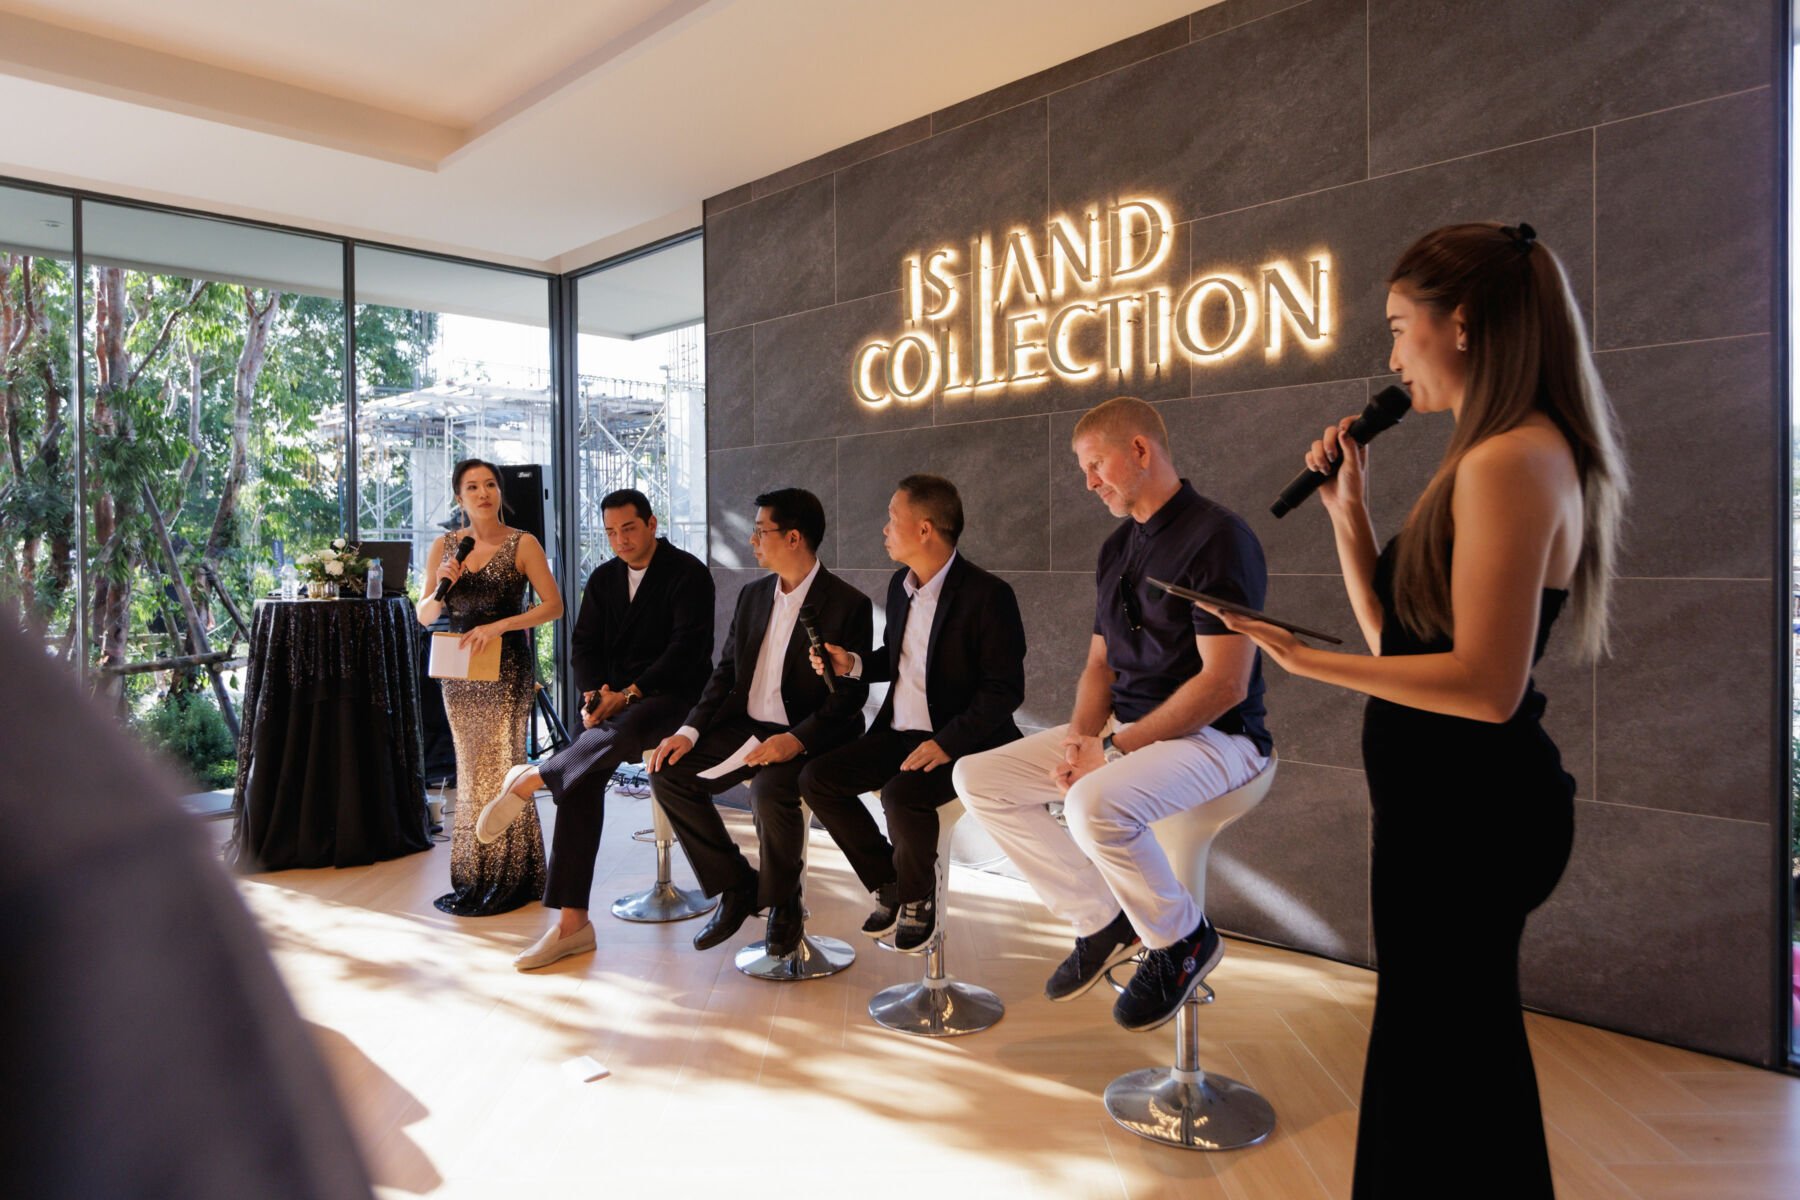 Siamese Stone just launched The Island Collection, a luxury residence project in Phuket